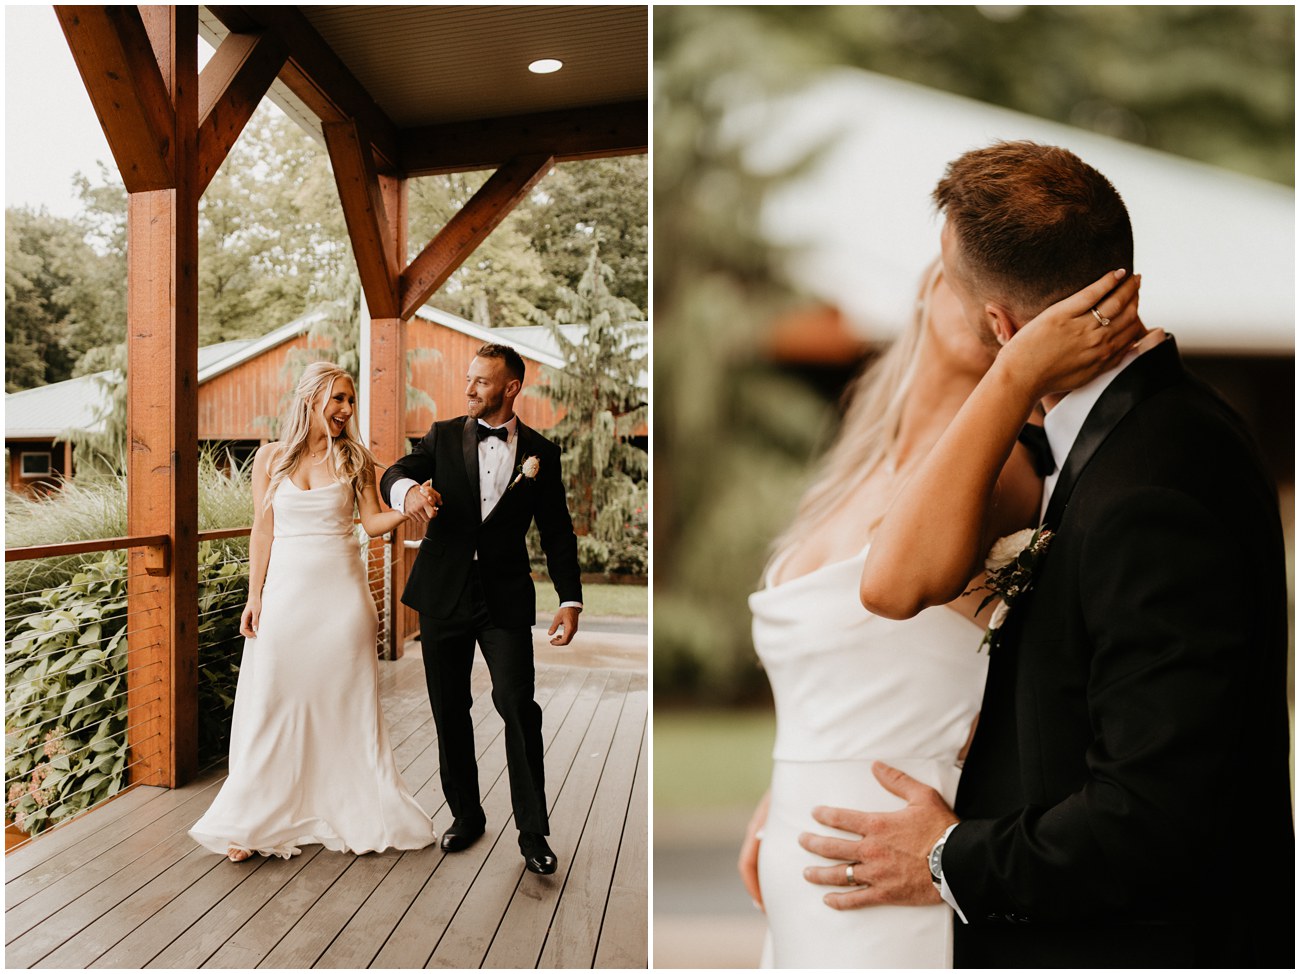 Collage of bride and groom being playful on porch of rustic building